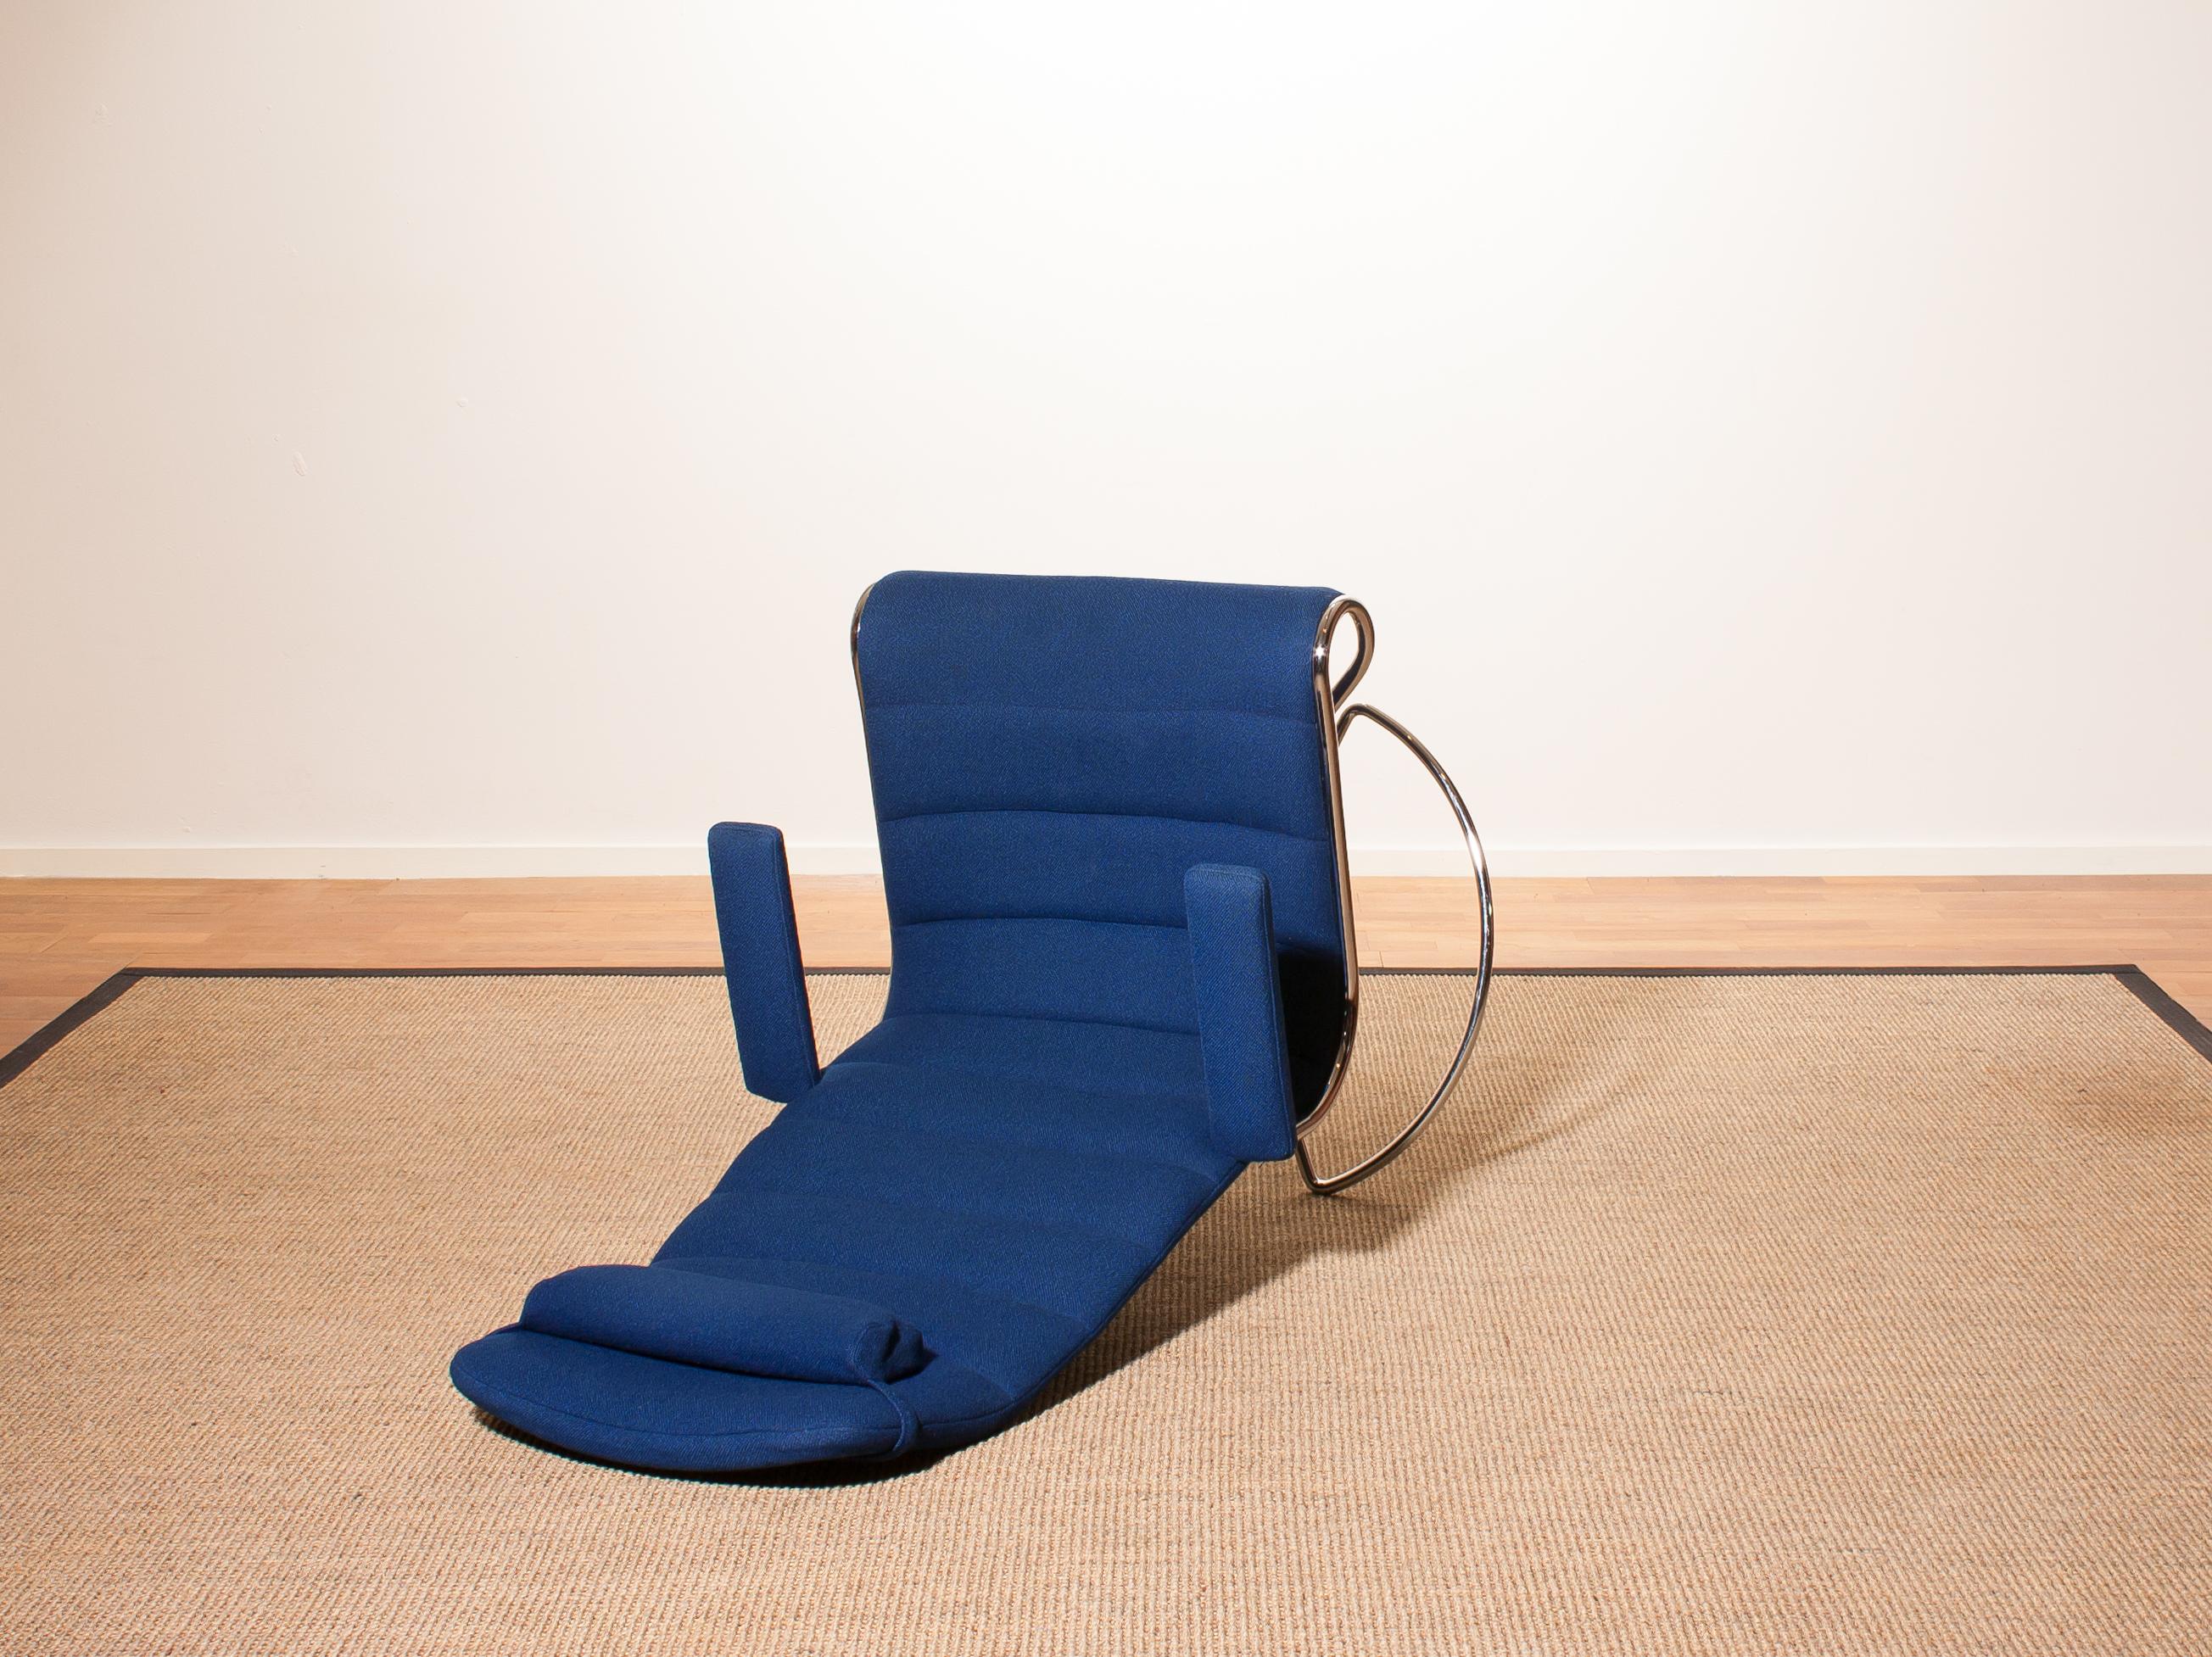 Late 20th Century 1980s, Chrome with Royal Blue Fabric 'Minister' Swivel Chair by Bruno Mathsson